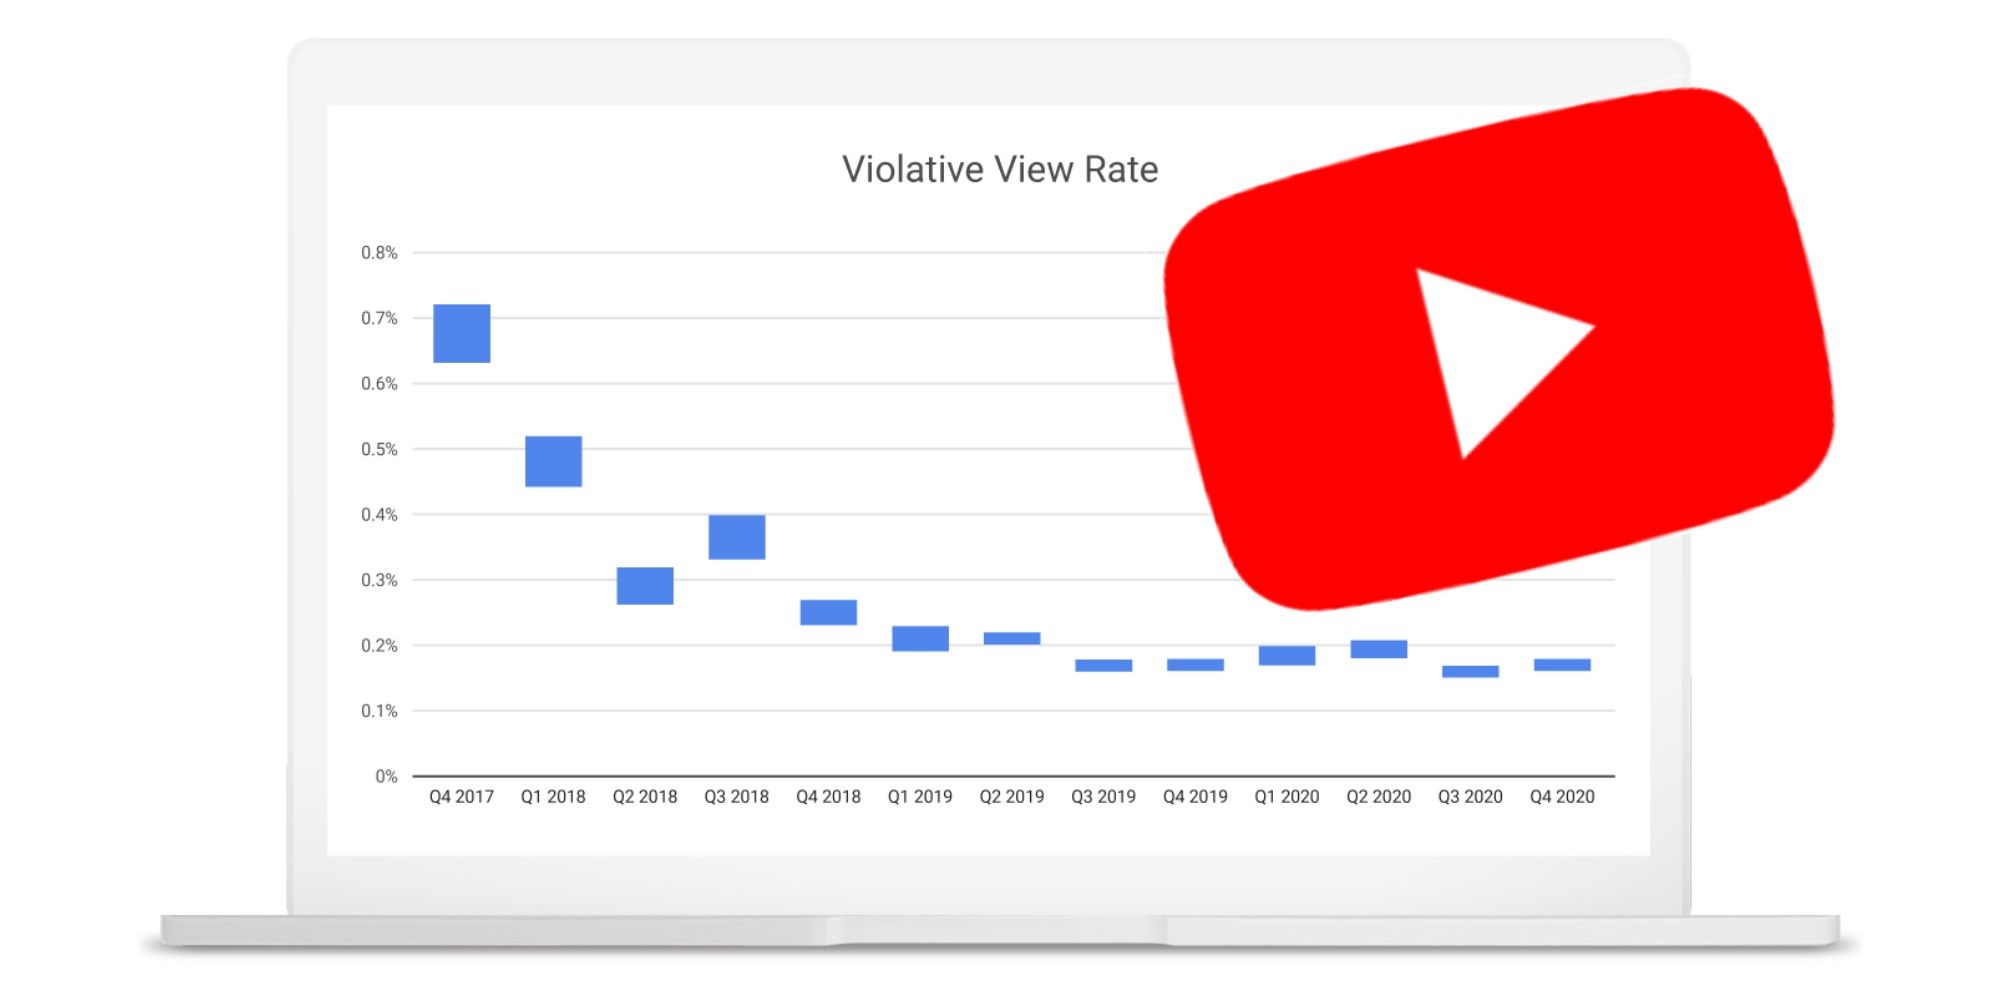 YouTube violative view rate